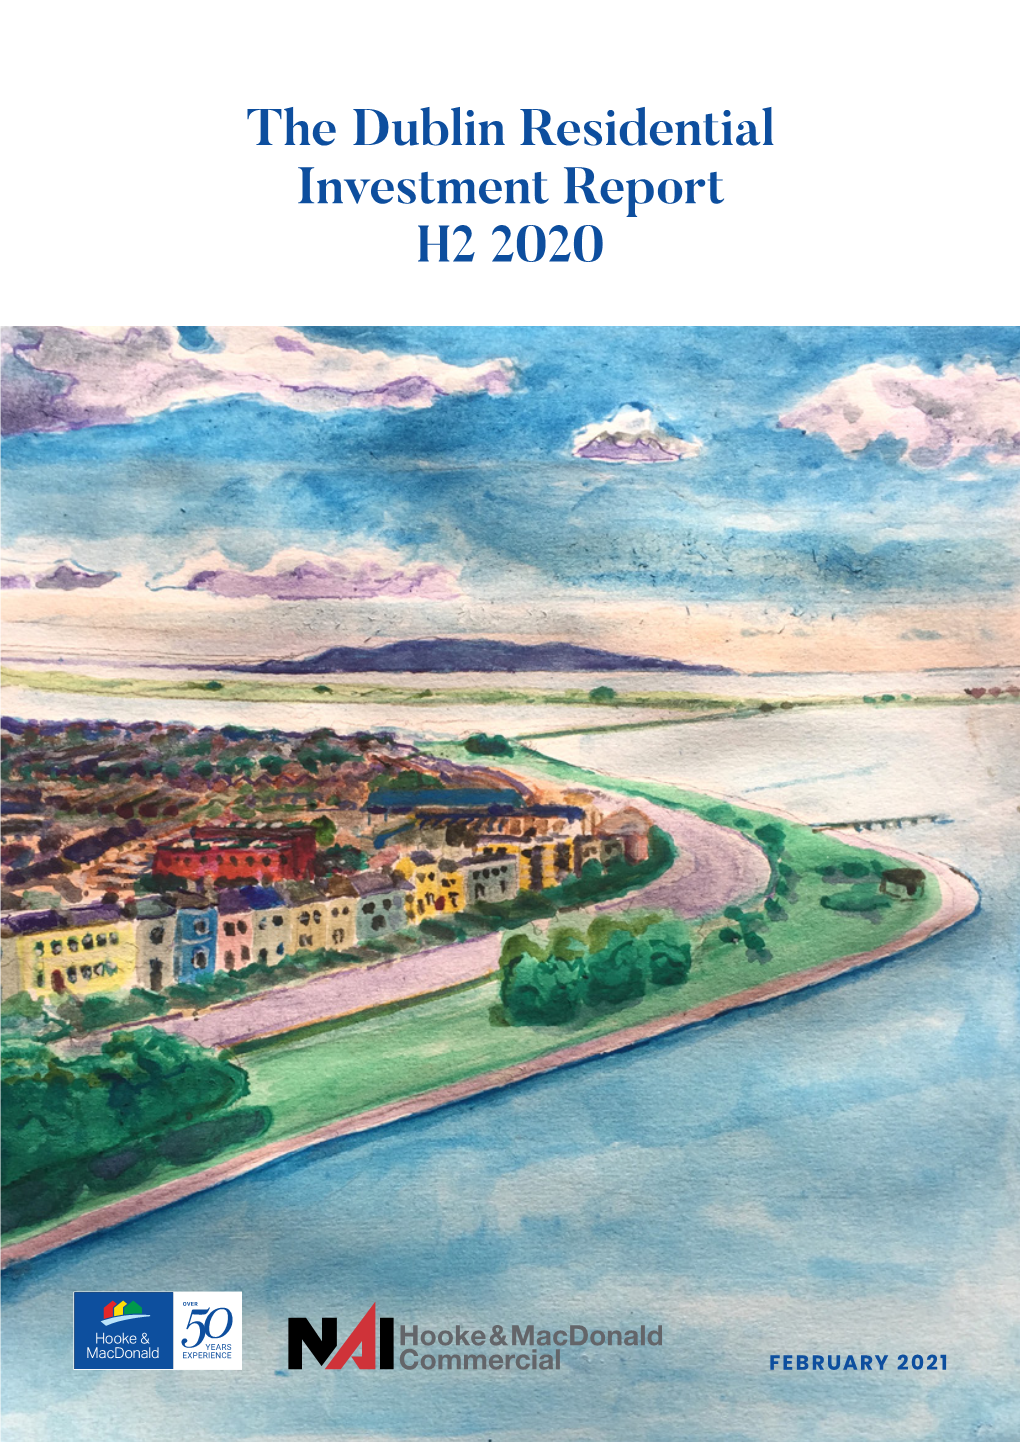 The Dublin Residential Investment Report H2 2020